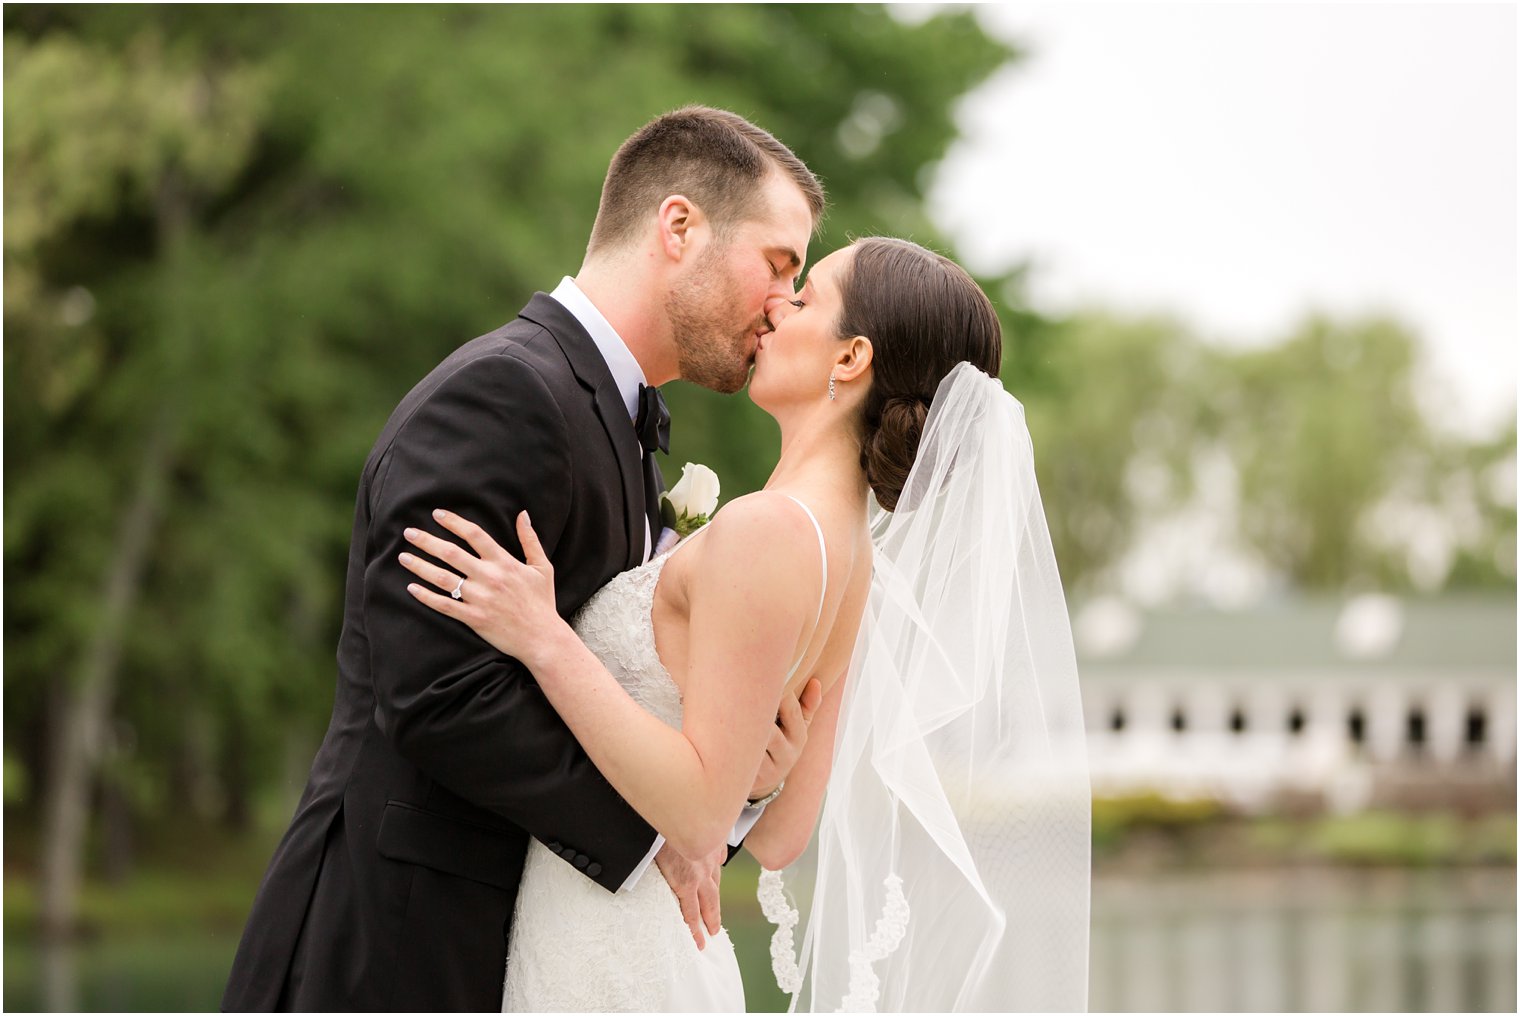 Bride and groom kissing on wedding day | Photos by Idalia Photography